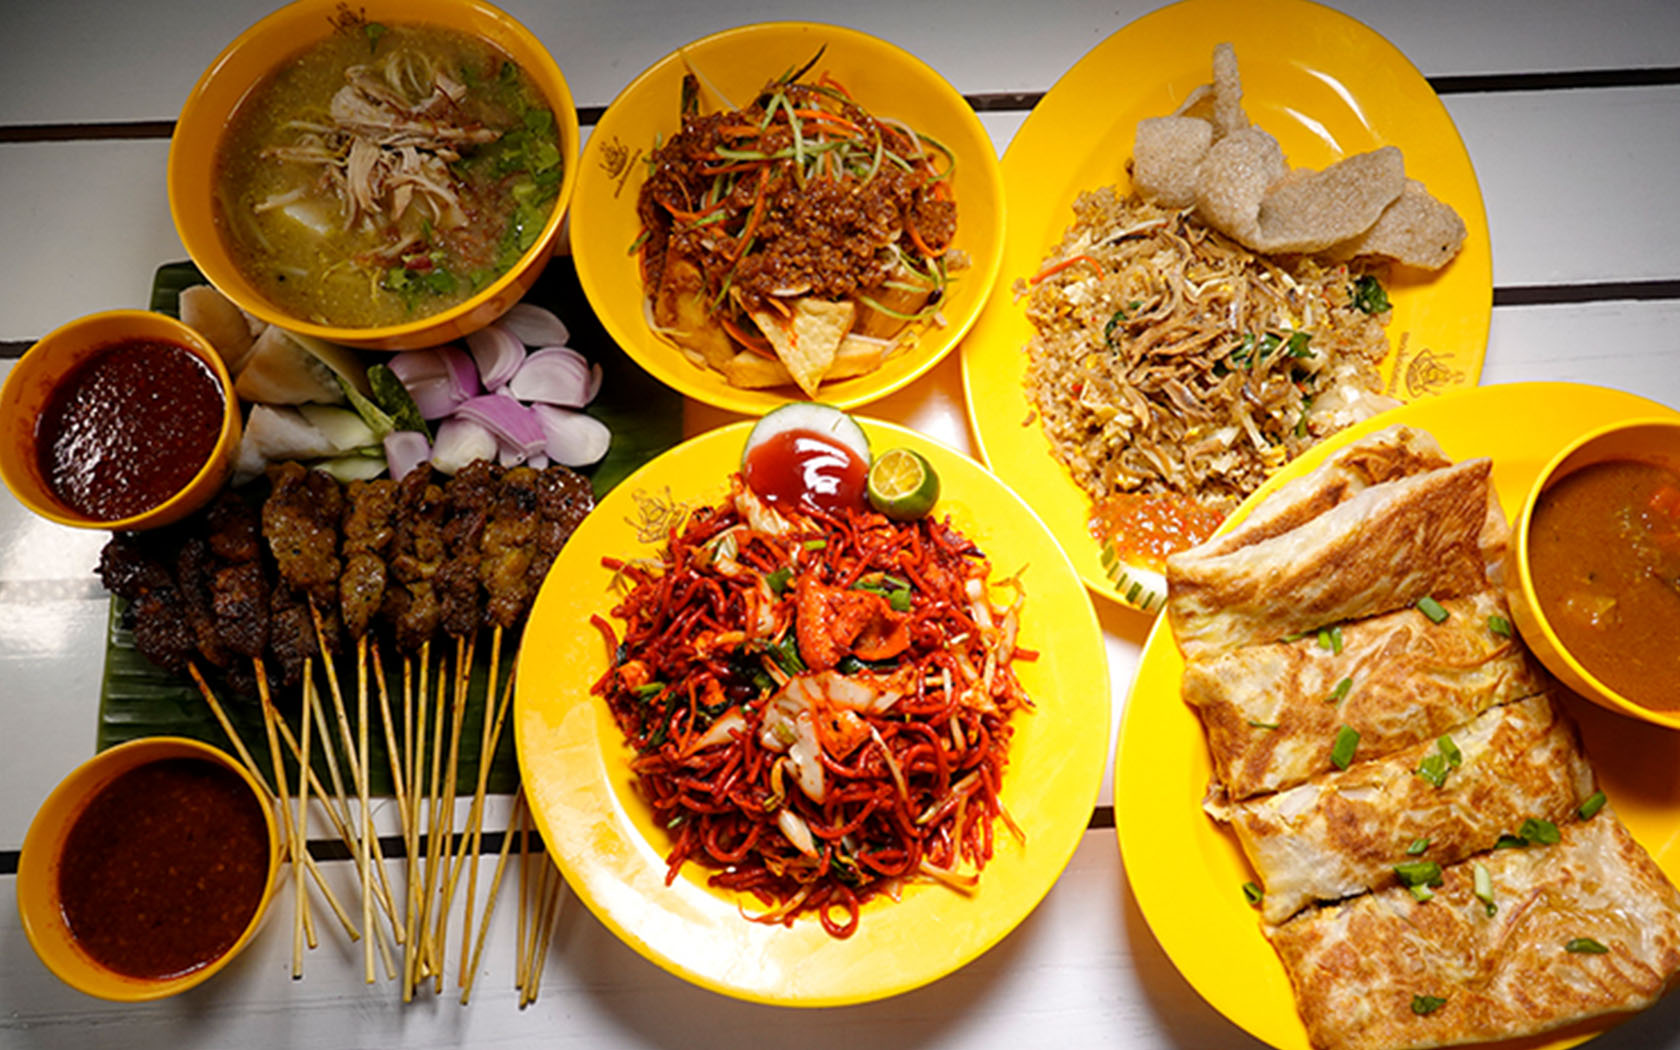 Image of BBQ chicken wings, fried carrot cake, fried kway teow, oyster cake and fried prawn noodle